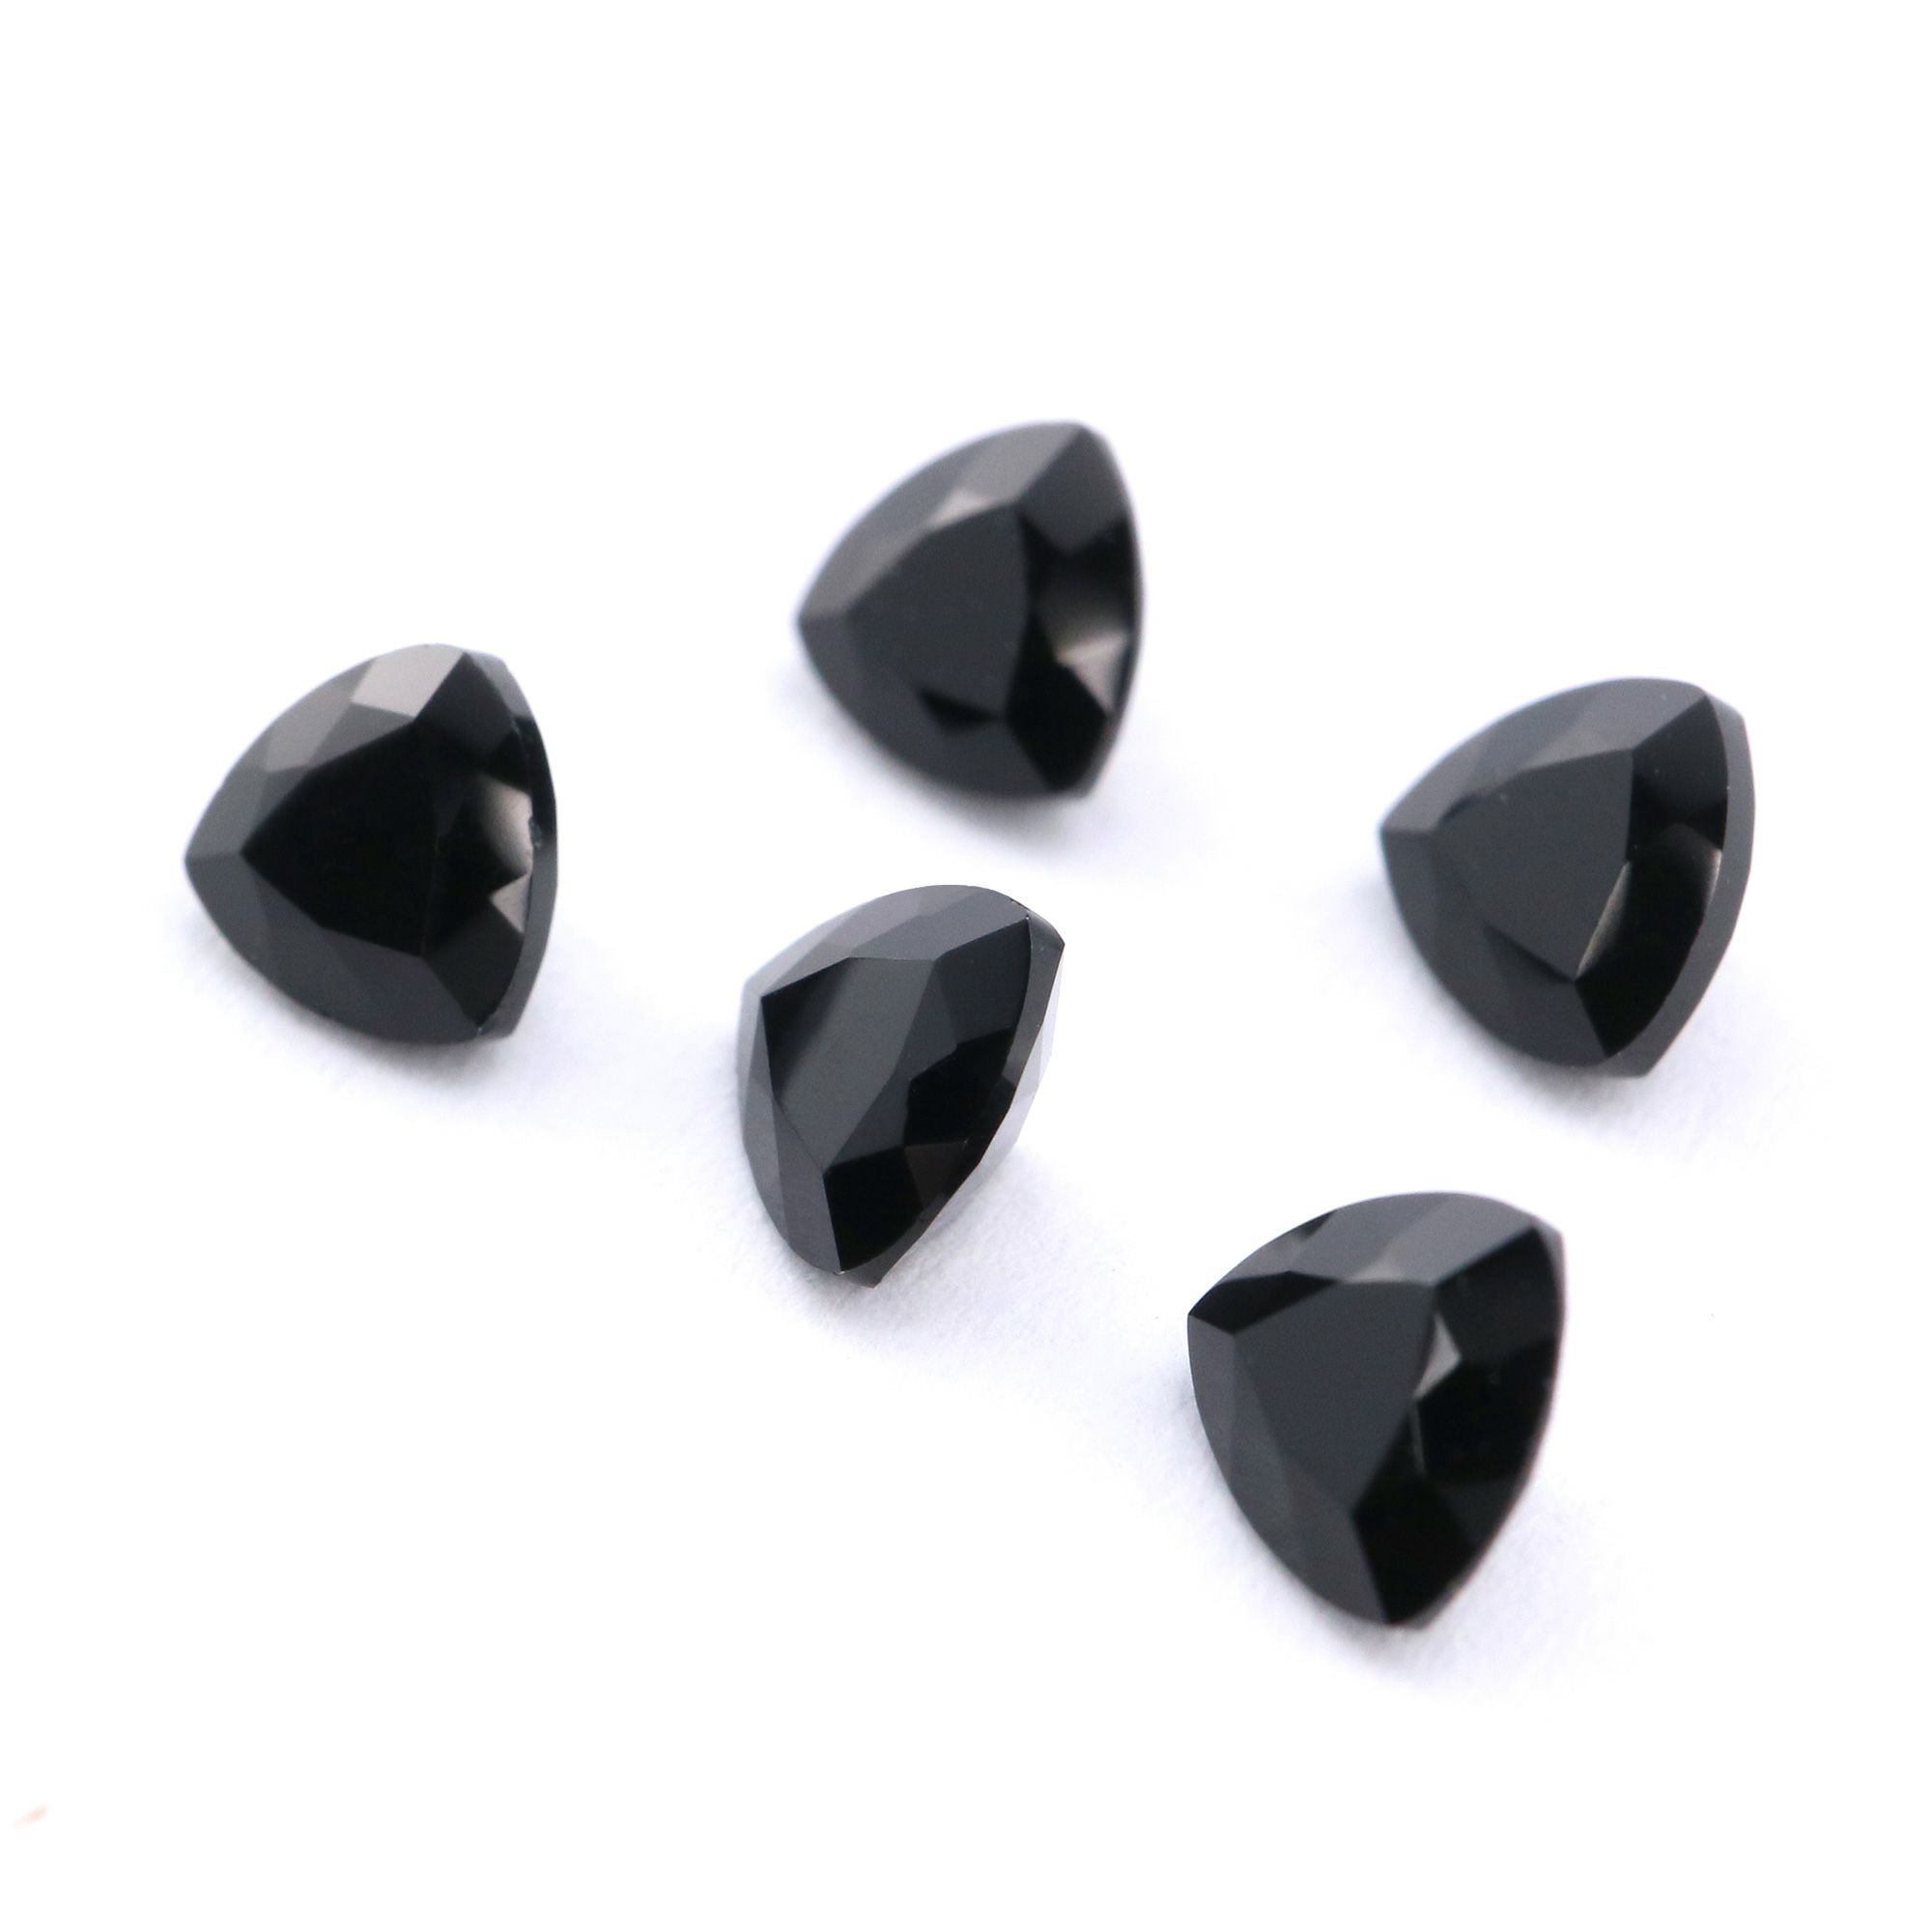 5Pcs 4MM Natural Trillion Black Onyx Faceted Cut Triangle Loose Gemstone Nature Semi Precious Stone DIY Jewelry Supplies 4160028 - Click Image to Close